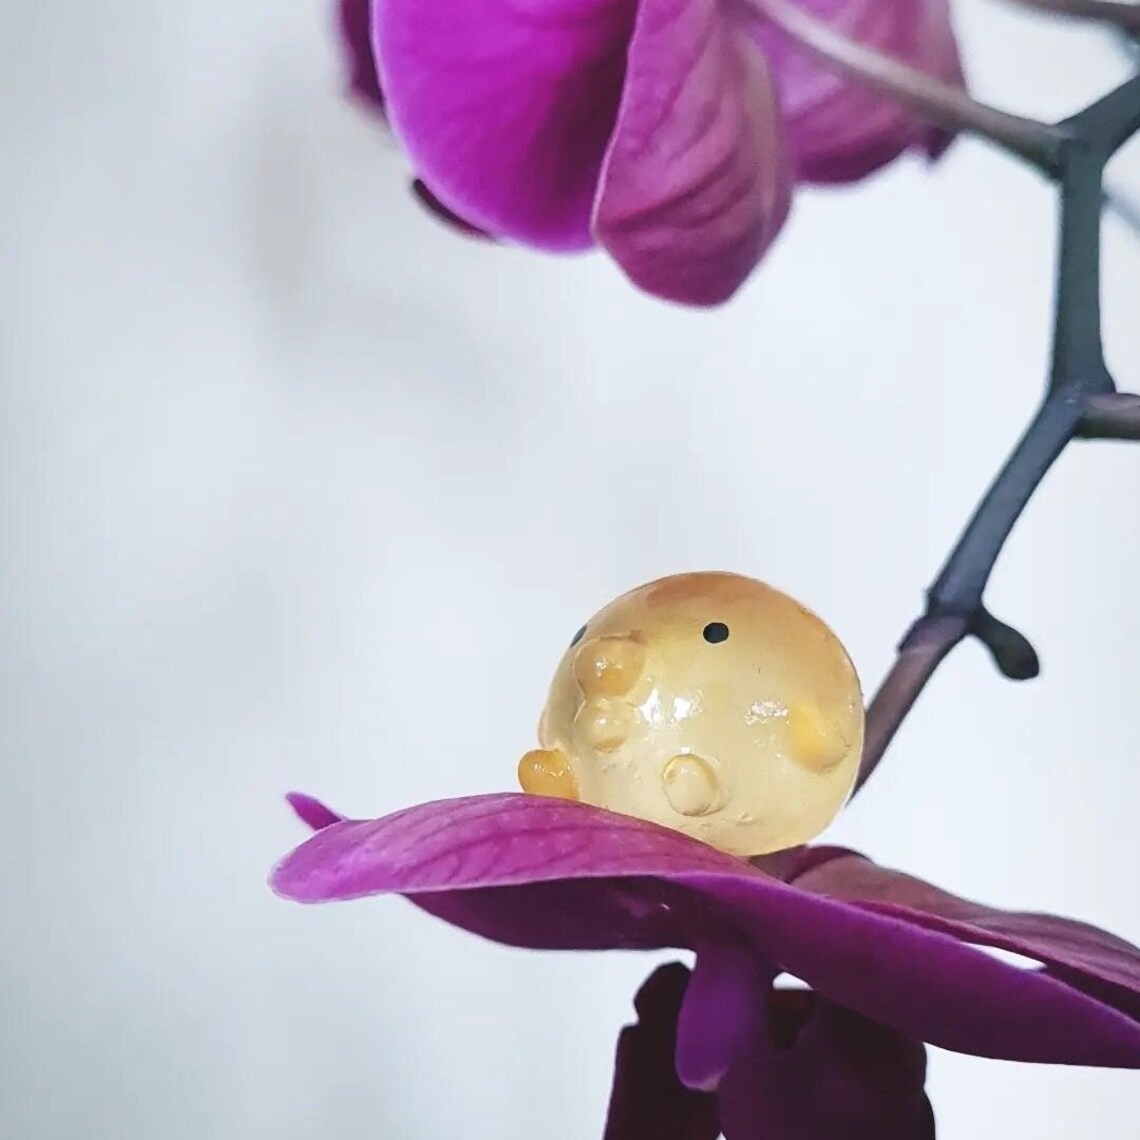 Liddle Lads, Cute Little Blob Like 3d Printed Resin Creatures By Ni (8)